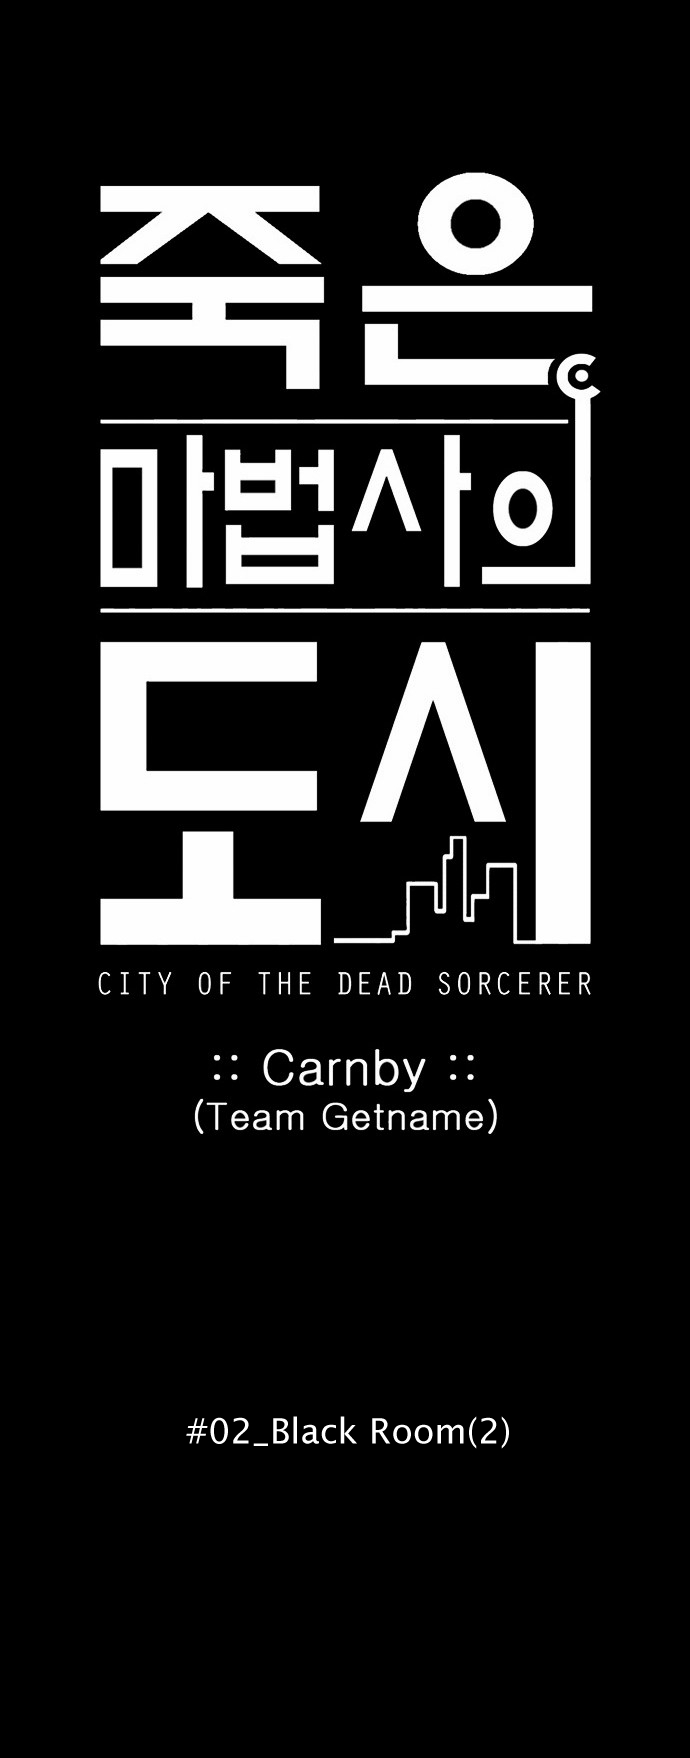 City of the Dead Sorcerer Ch. 15 Black Room (2)